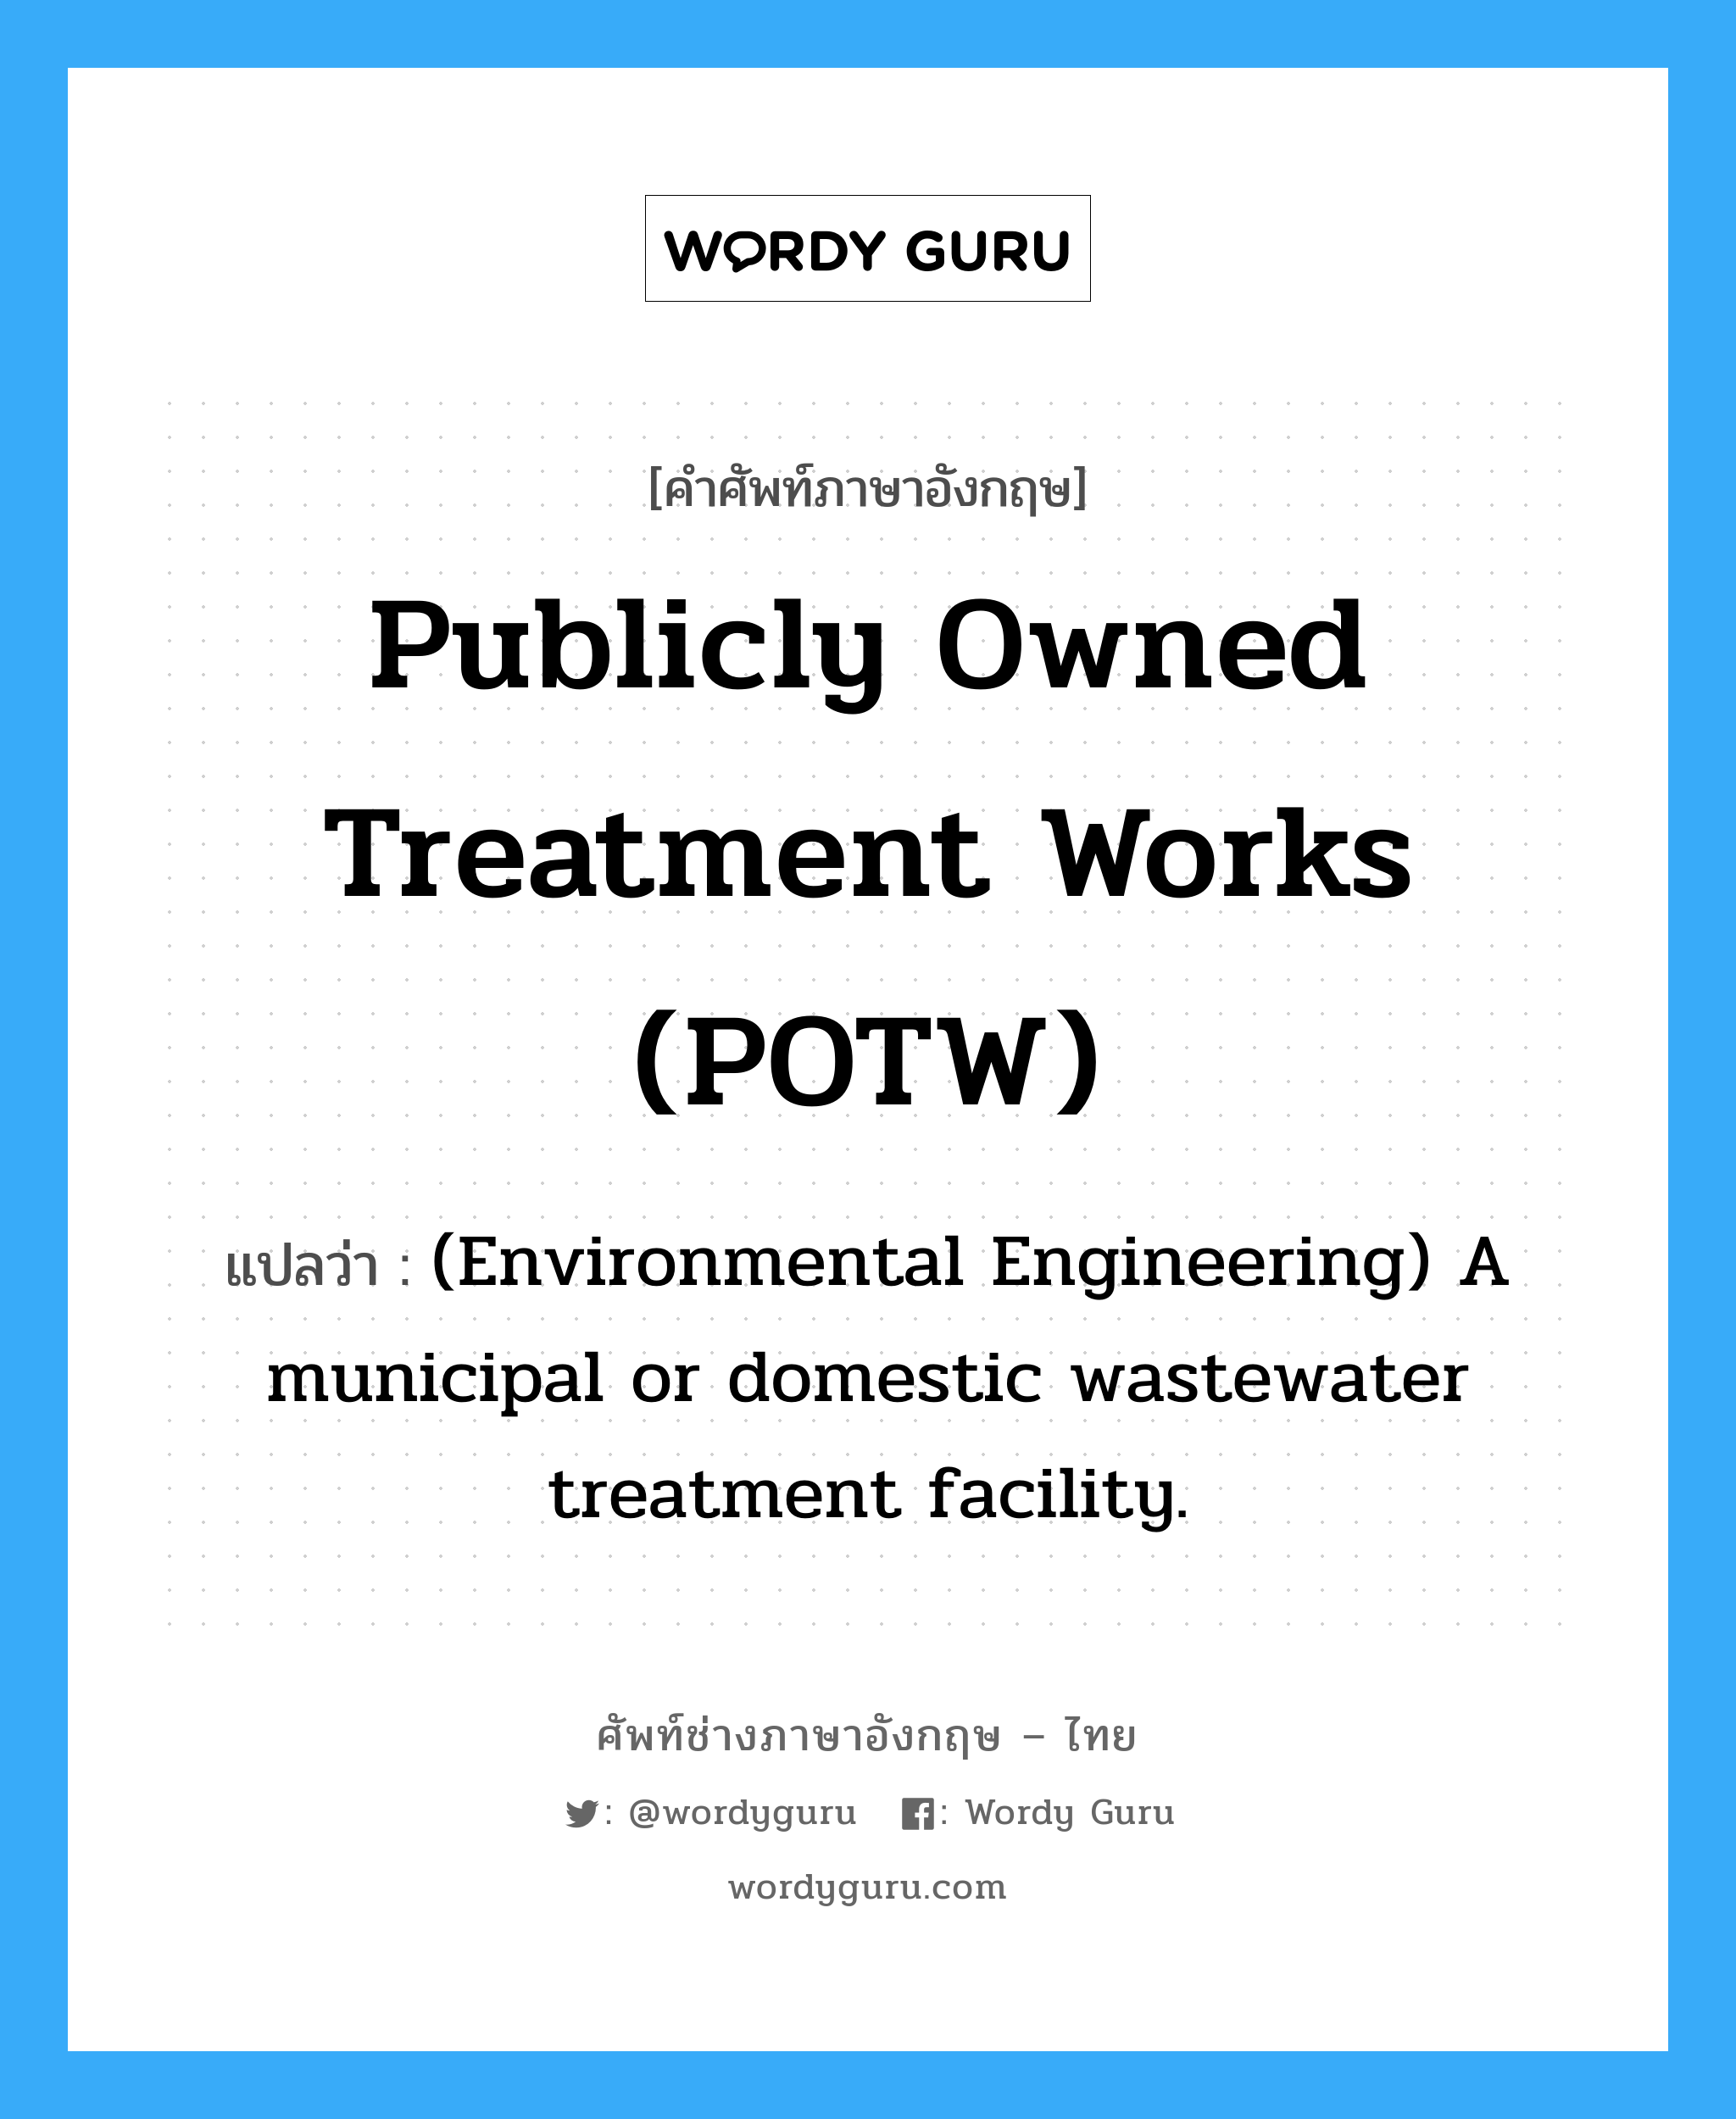 Publicly owned treatment works (POTW) แปลว่า?, คำศัพท์ช่างภาษาอังกฤษ - ไทย Publicly owned treatment works (POTW) คำศัพท์ภาษาอังกฤษ Publicly owned treatment works (POTW) แปลว่า (Environmental Engineering) A municipal or domestic wastewater treatment facility.